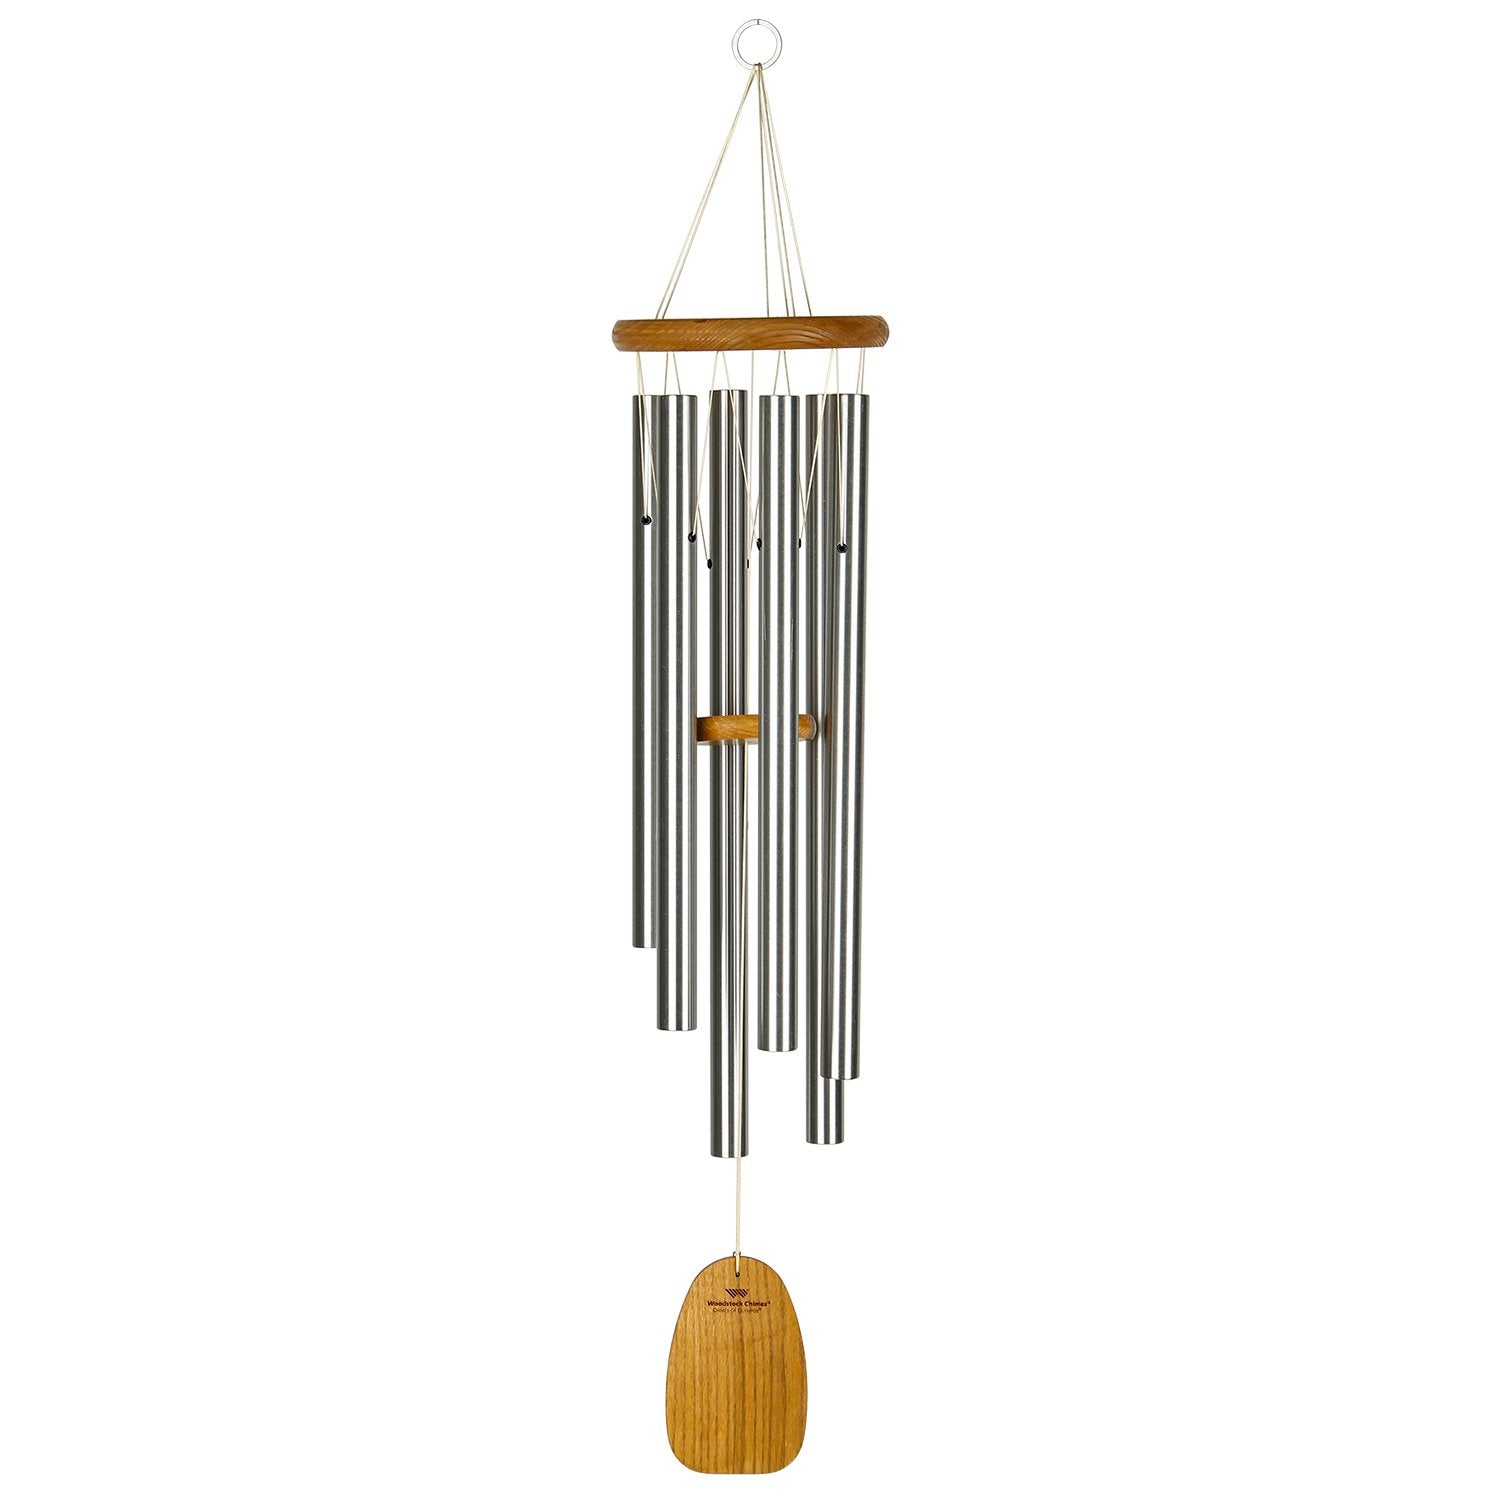 Chimes of Olympos full product image